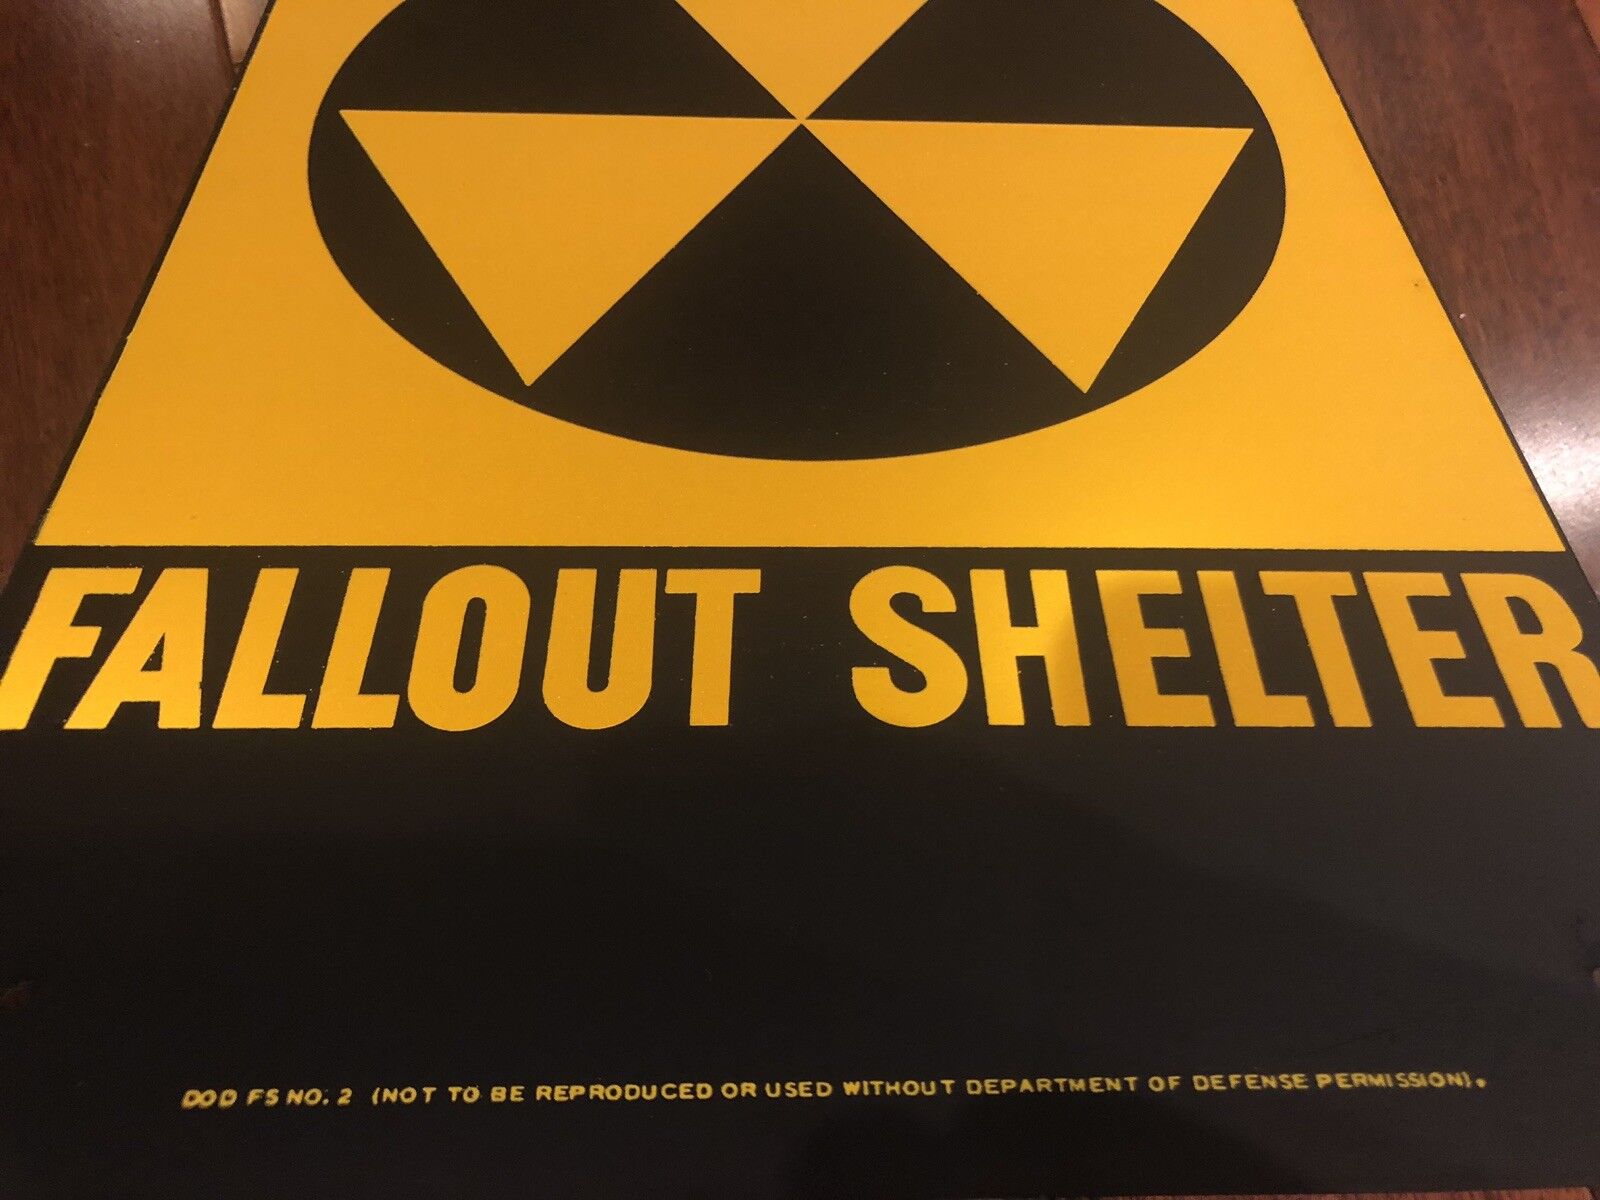 FALLOUT SHELTER SIGN  Original U.S. Gov Issue. 10x14 Steel